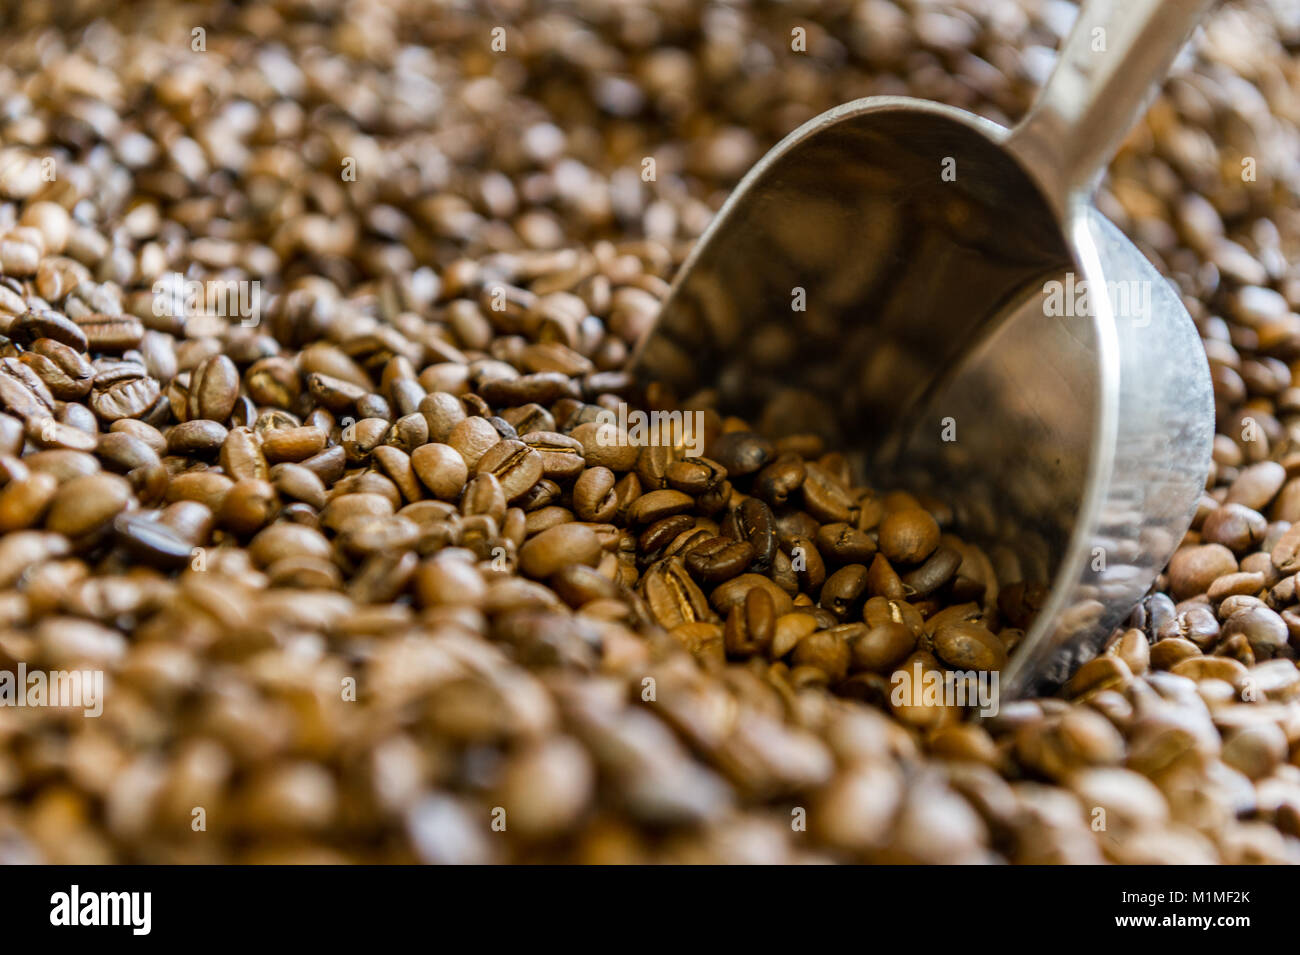 Roasted coffee beans with a metal scoop. Stock Photo